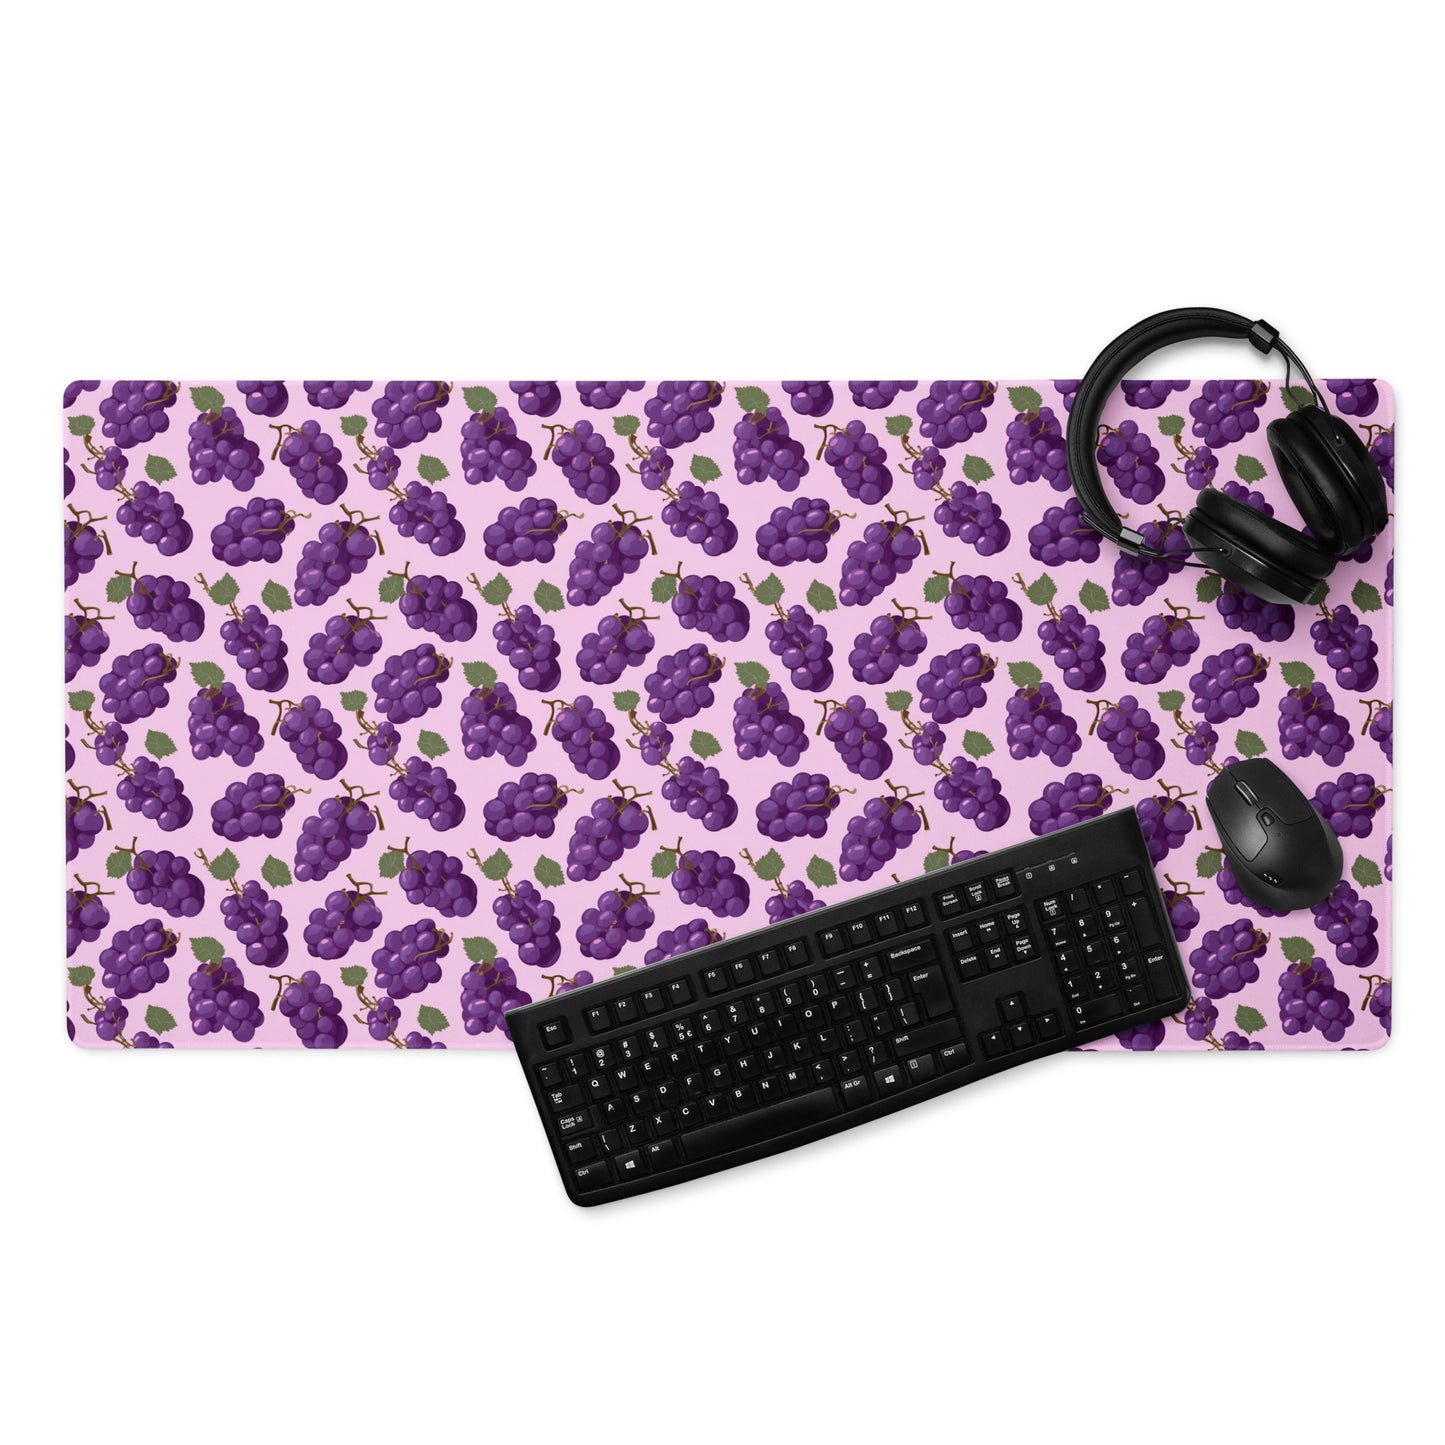 A 36" x 18" desk pad with bushels of grapes all over it displayed with a keyboard, headphones and a mouse. Purple in color.